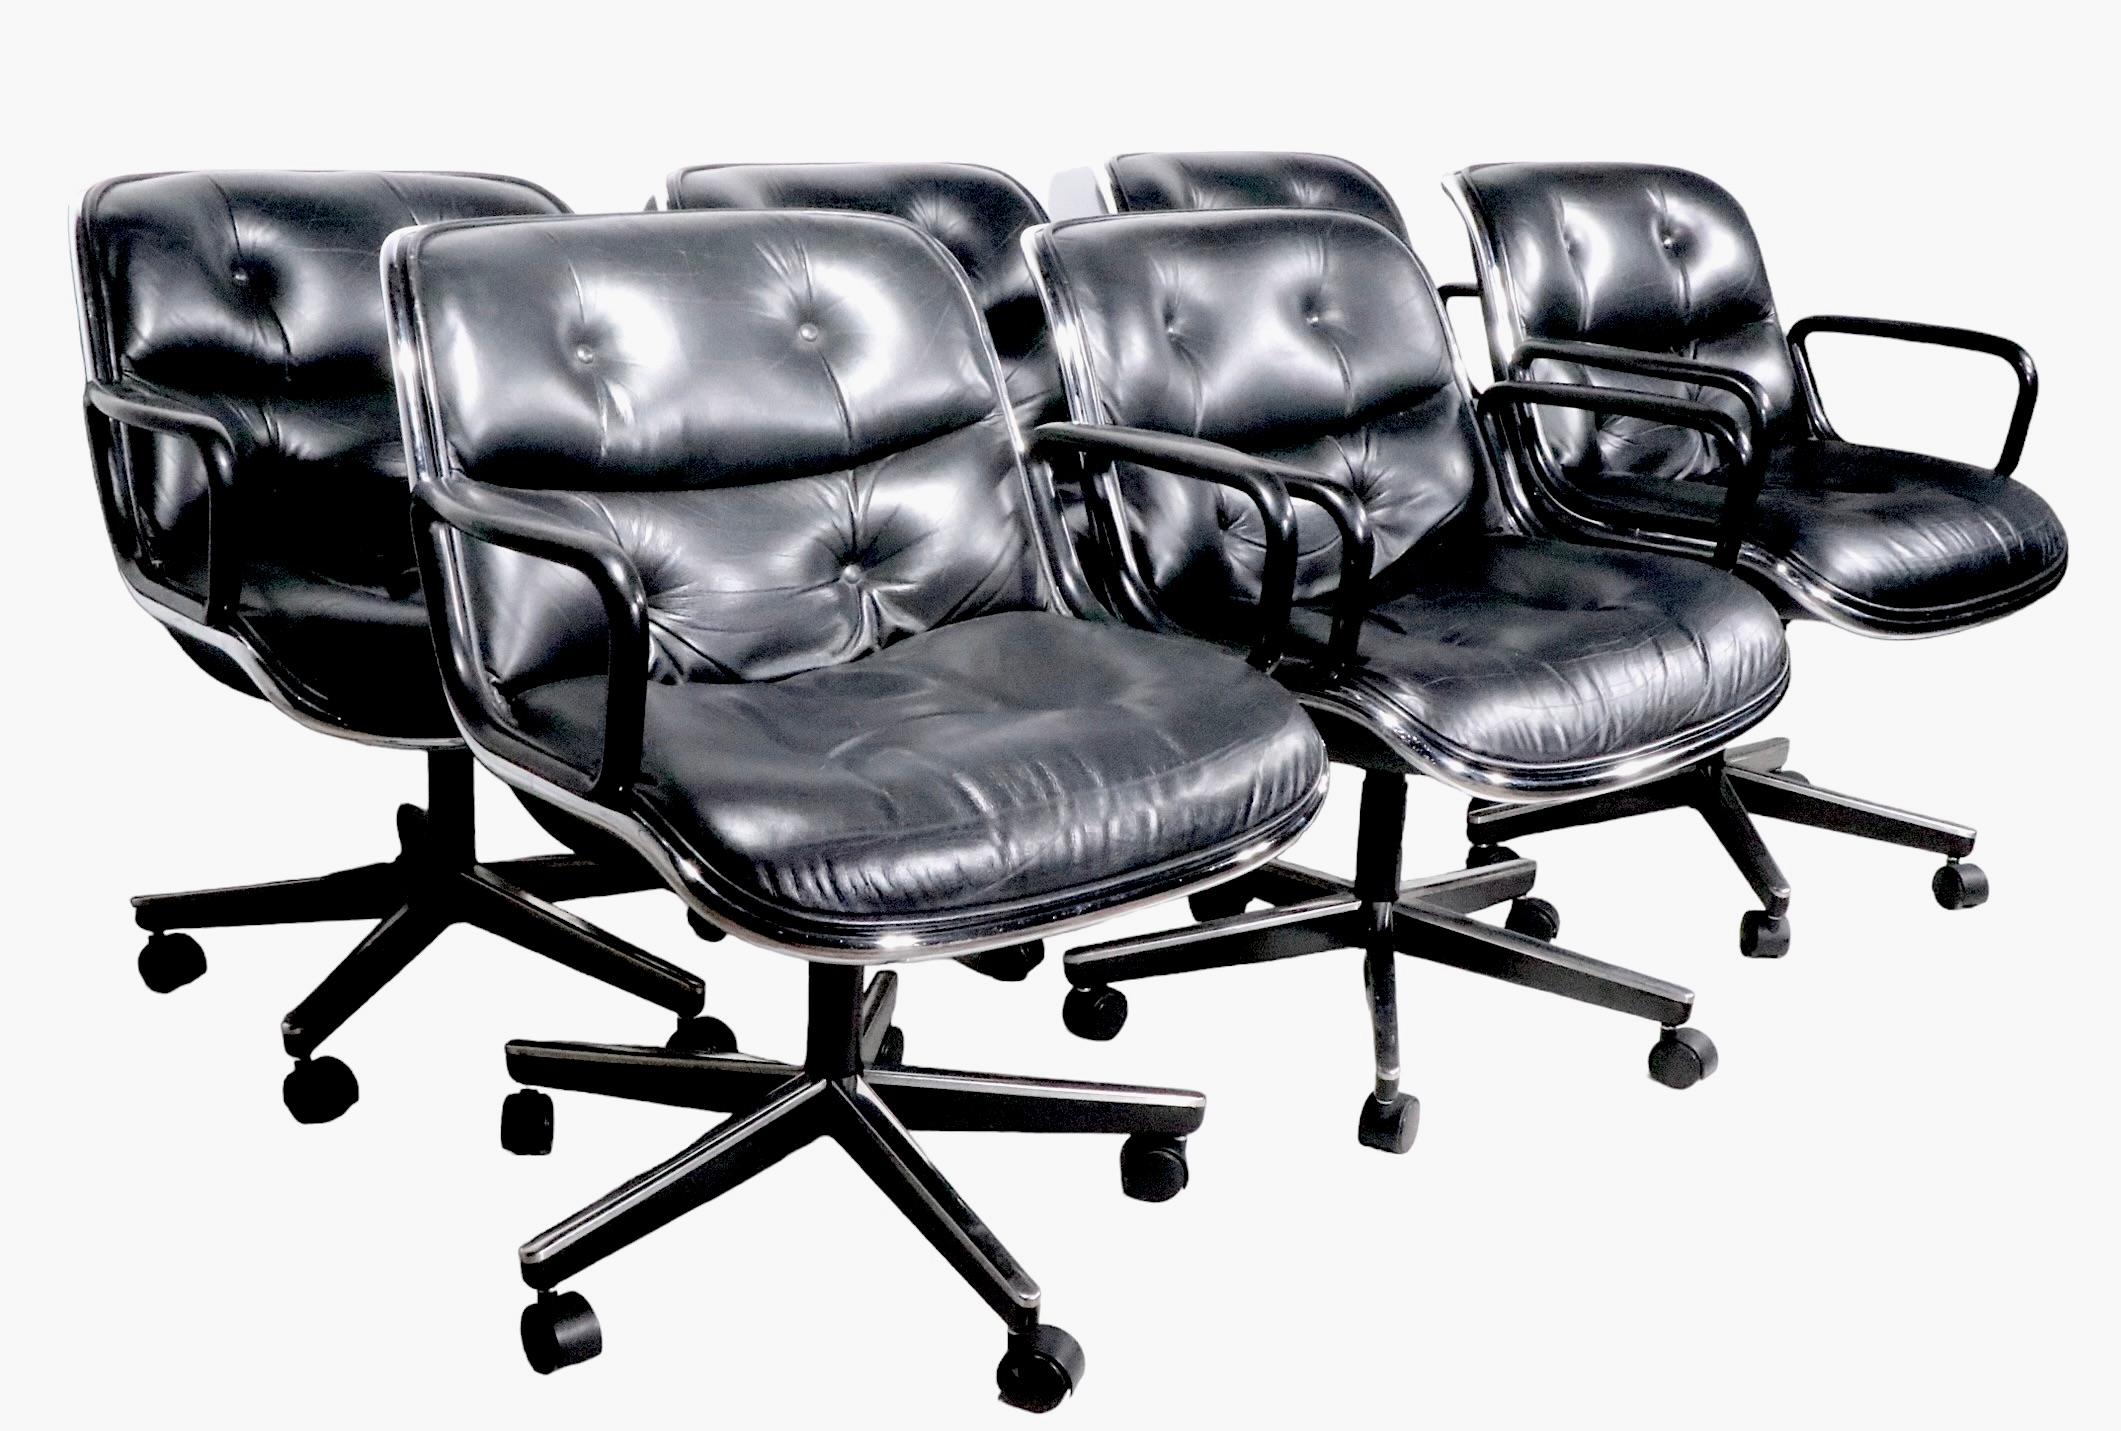 Steel 5 Knoll Swivel Tilt Office Chairs Designed by Charles Pollock for Knoll c 1960's For Sale